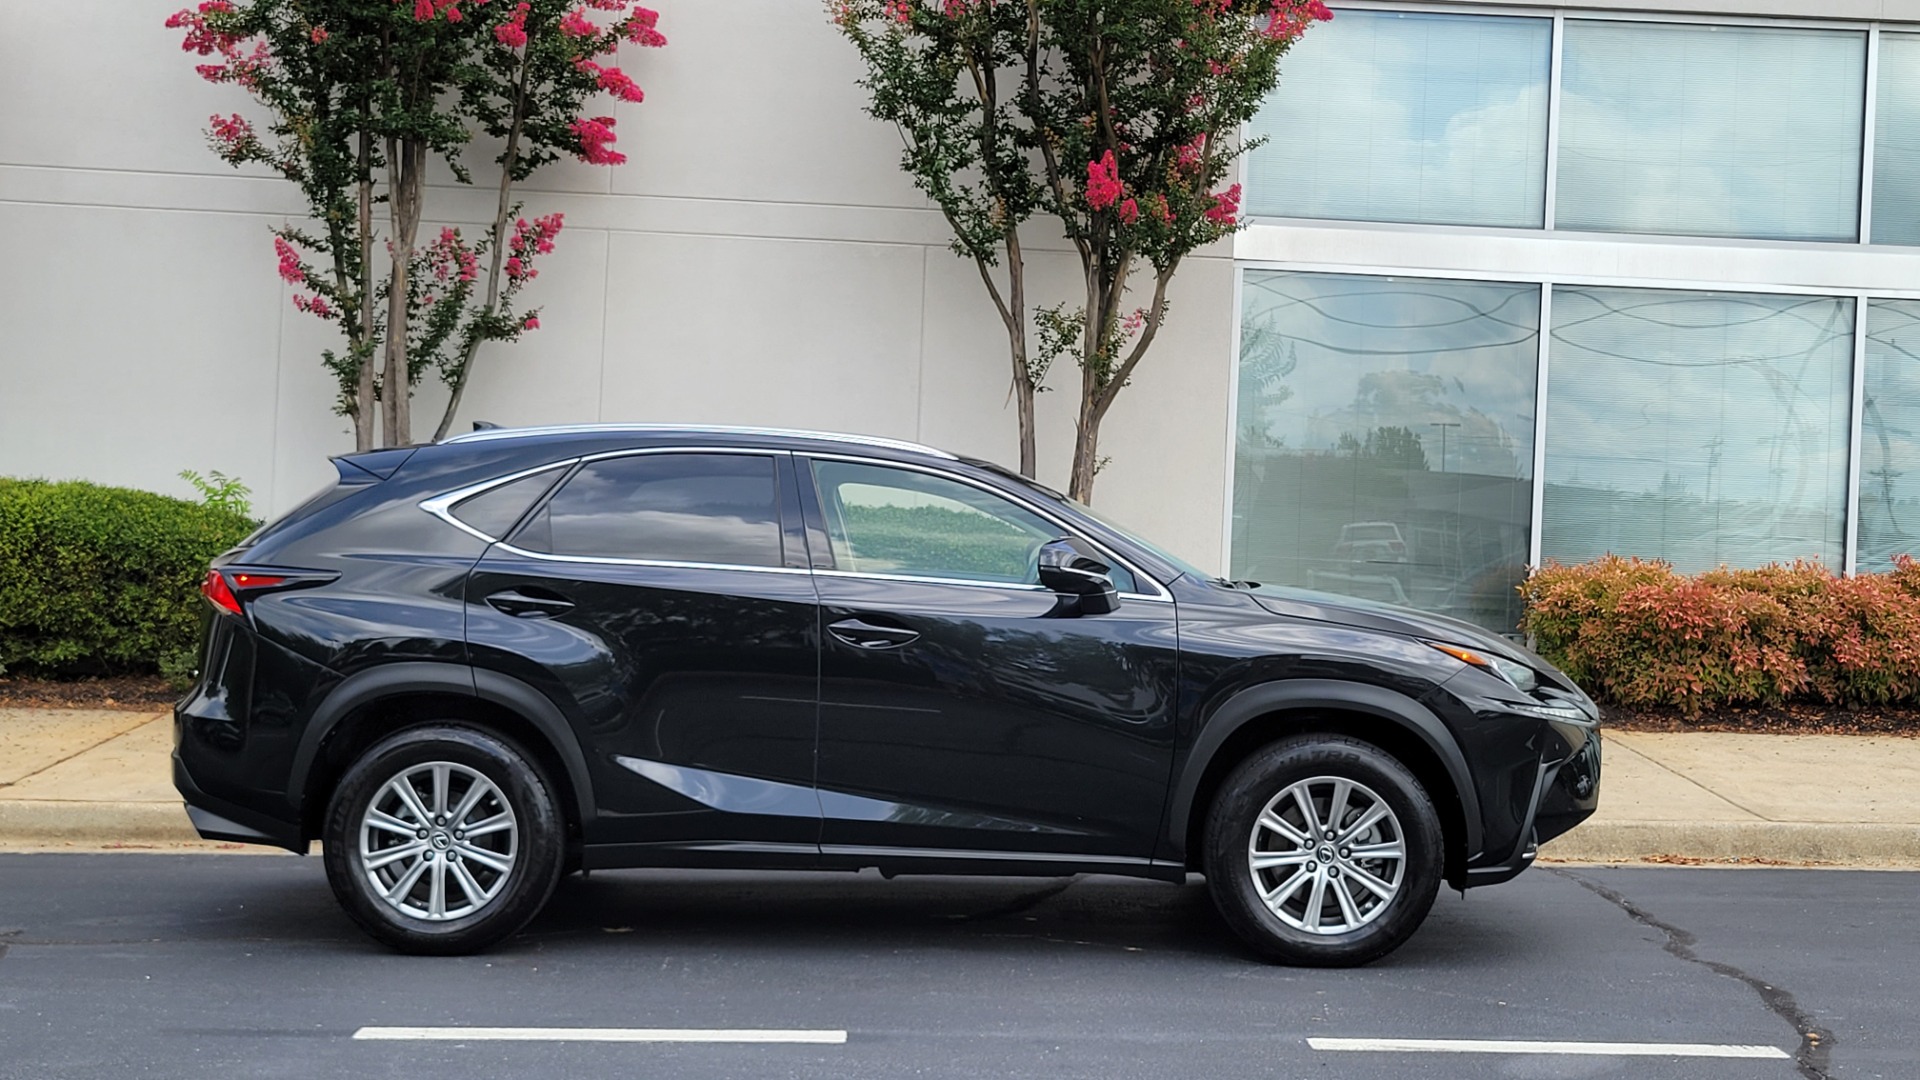 Used 2019 Lexus NX 300 / 2.0L TURBO / AUTO / SUNROOF / VENTILATED SEATS / CAMERA for sale Sold at Formula Imports in Charlotte NC 28227 7